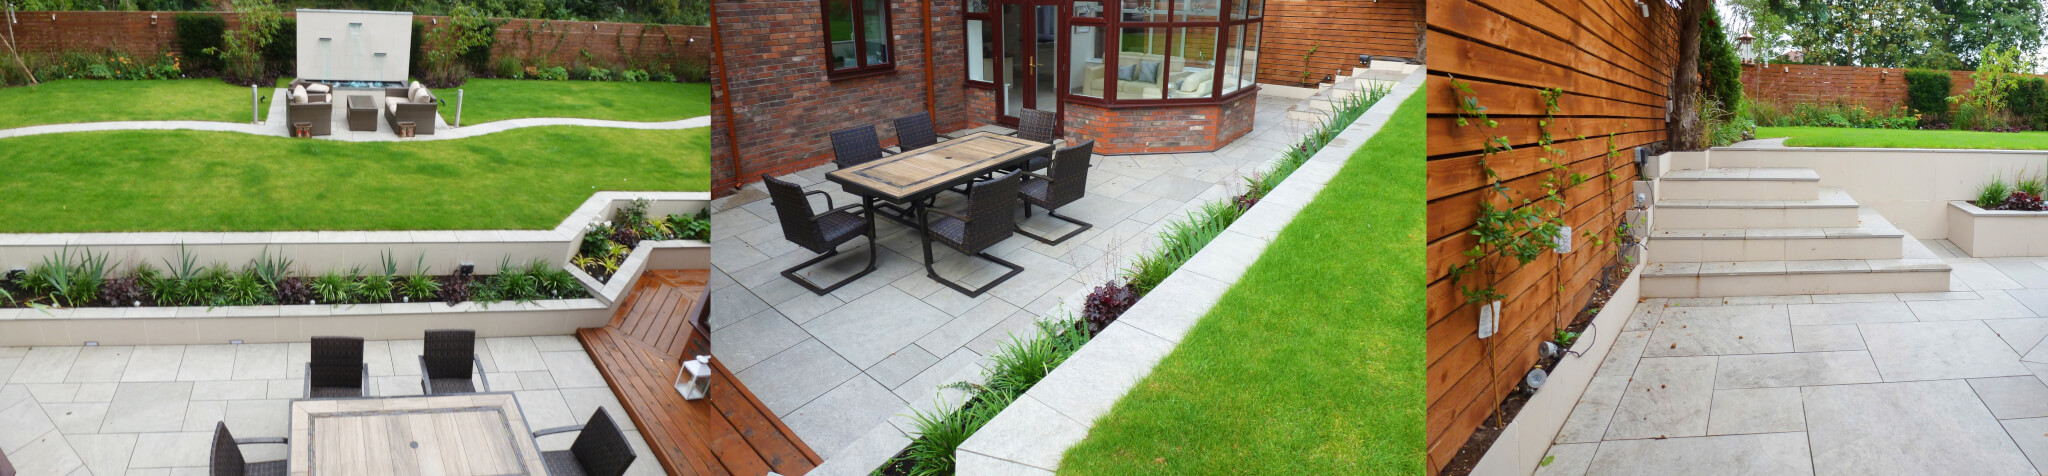 Landscaping and Paving Chesire